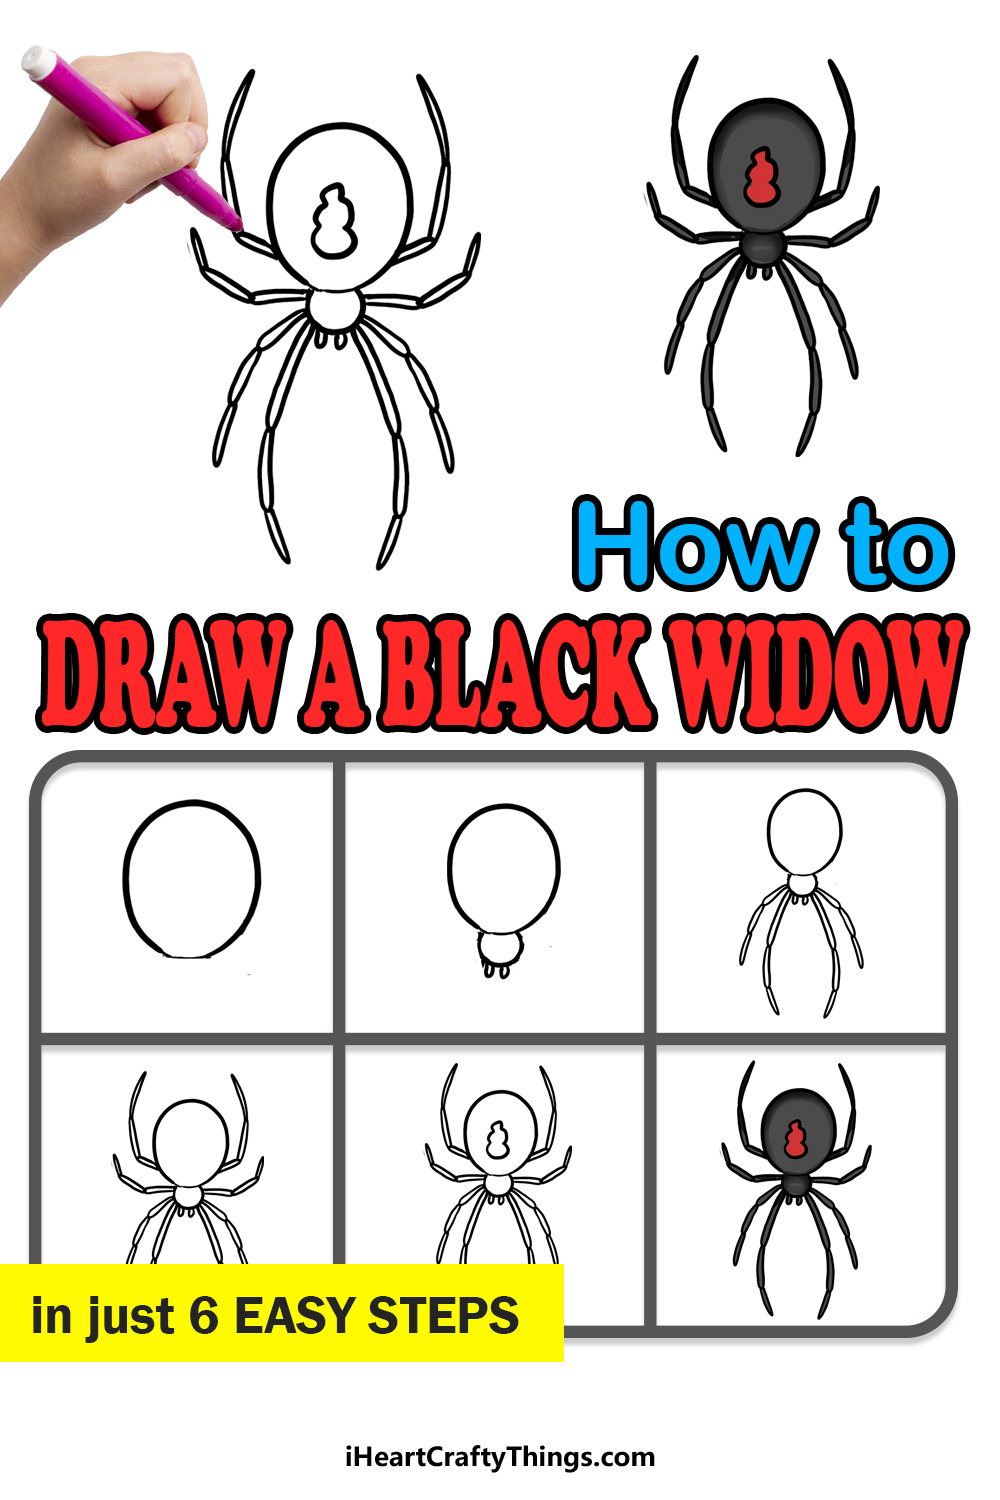 How to Draw A Black Widow step by step guide